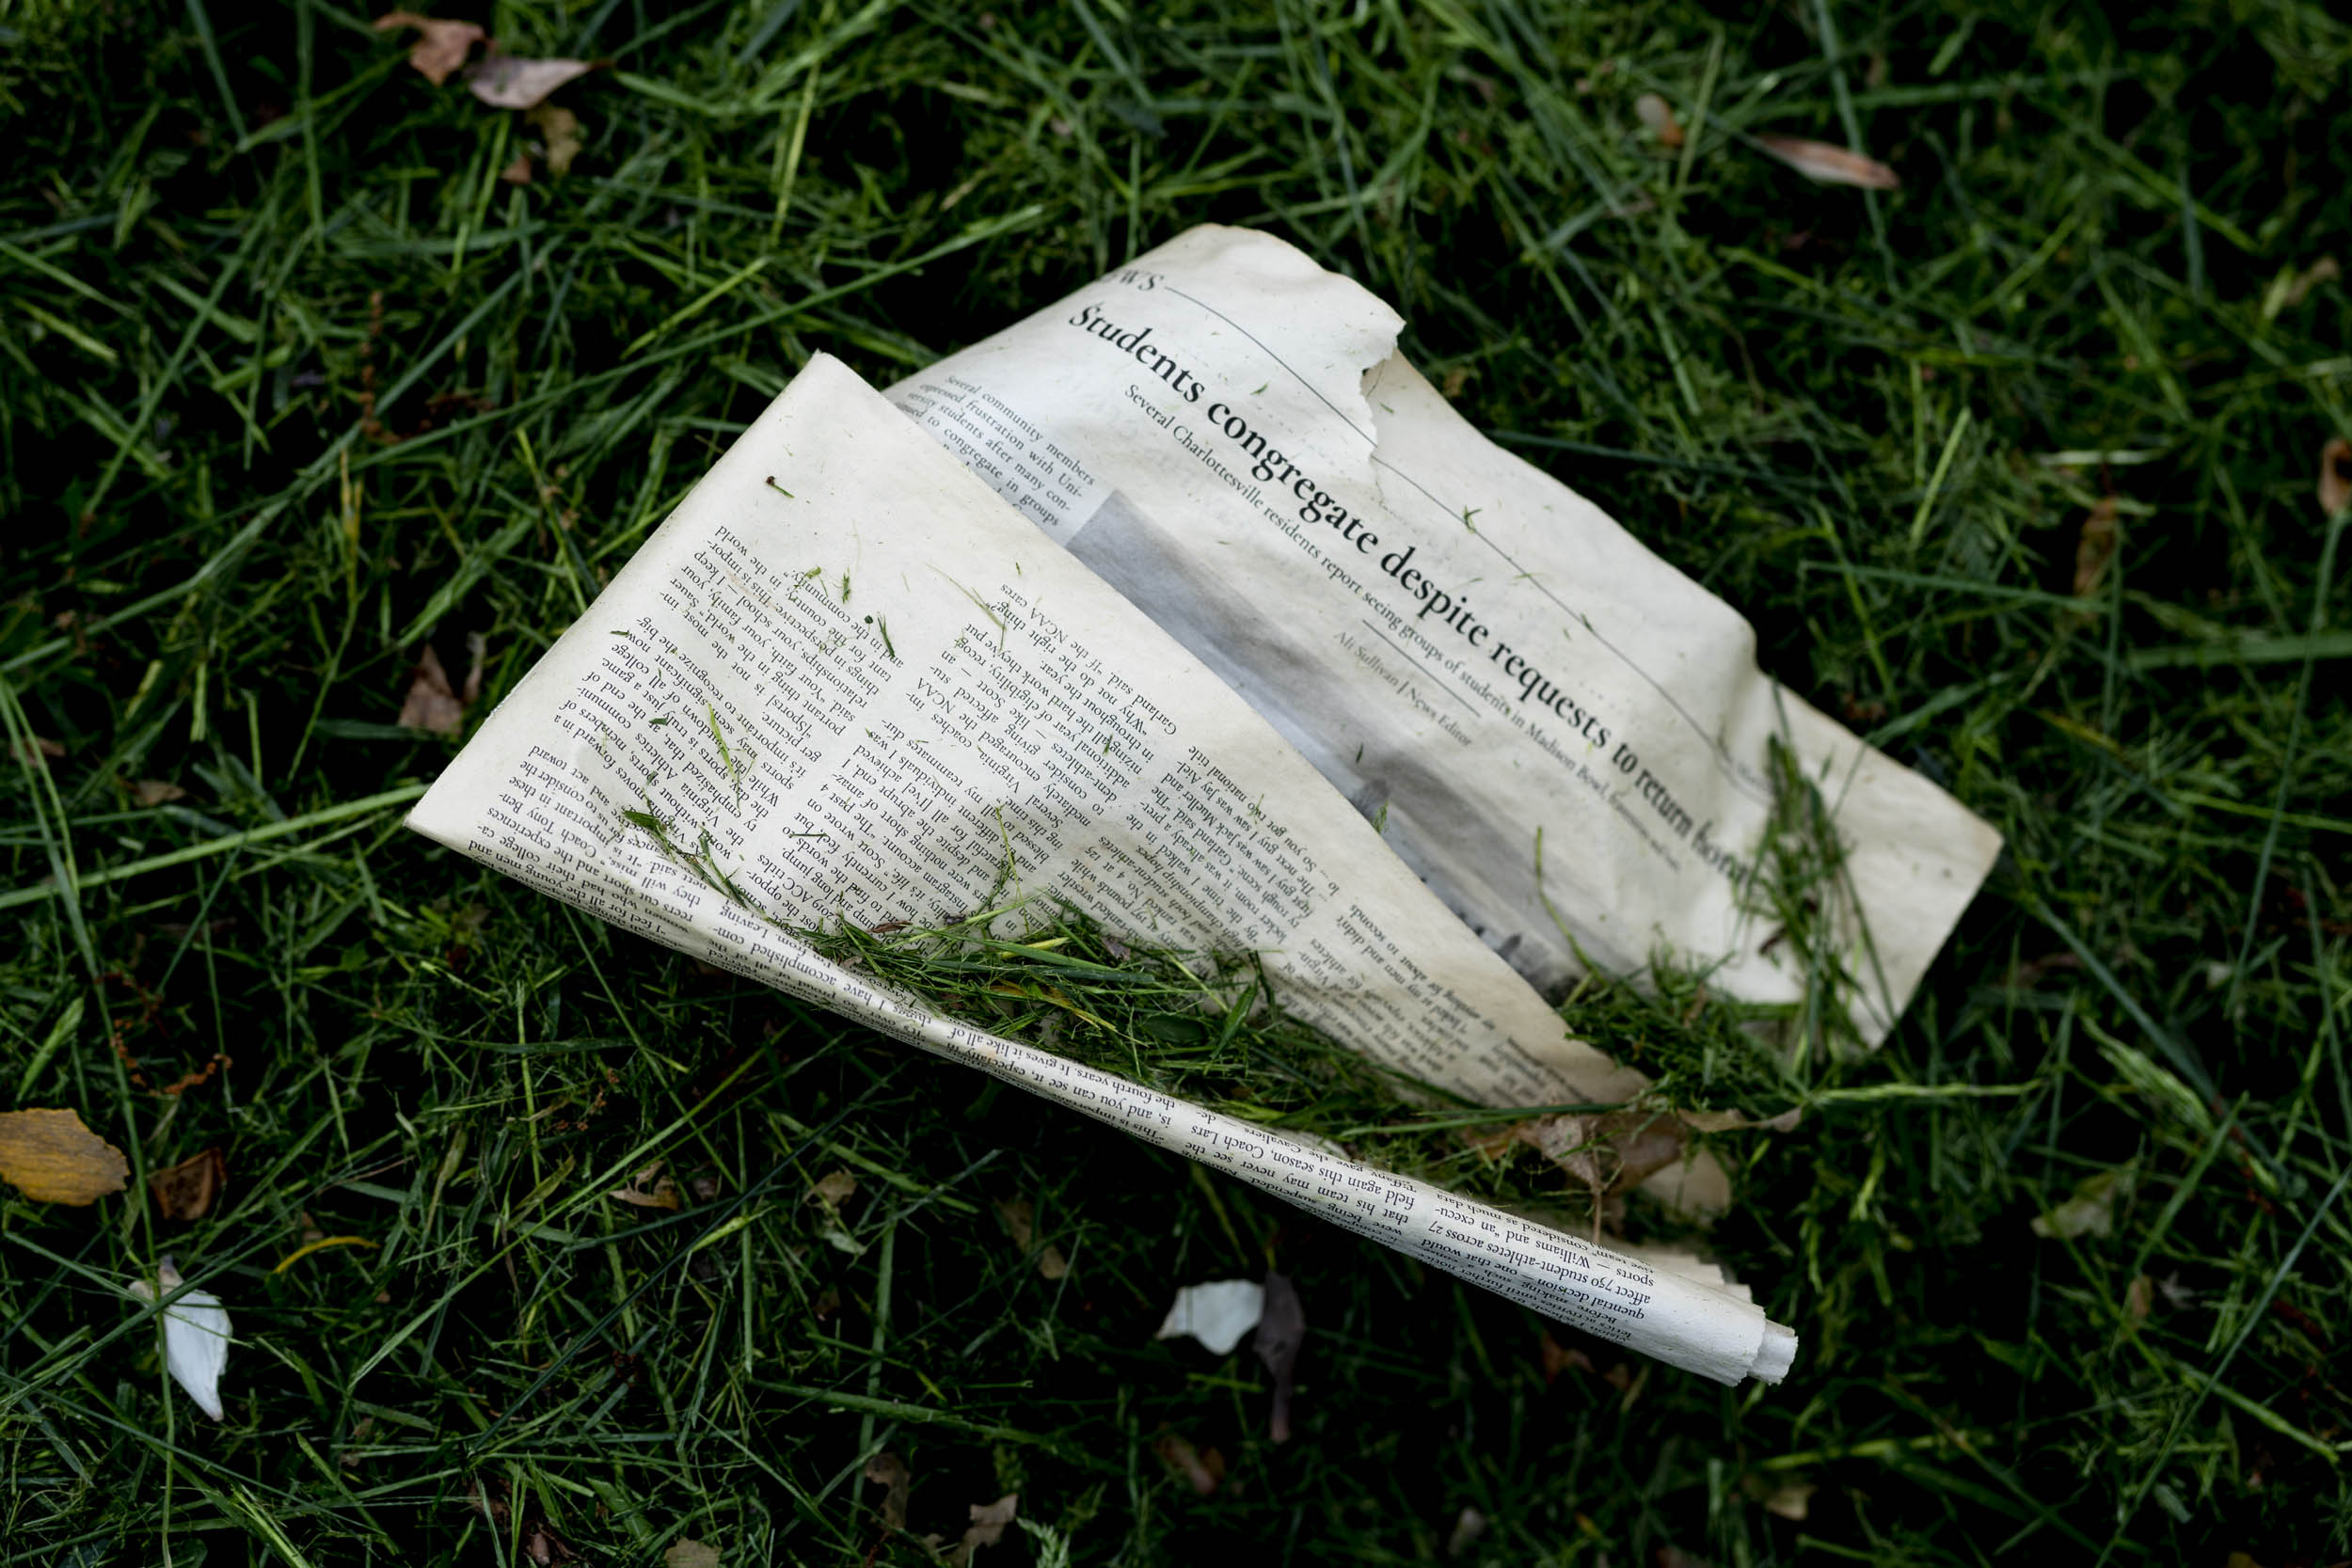 Torn Newspaper folded on the lawn with grass clippings on top of it